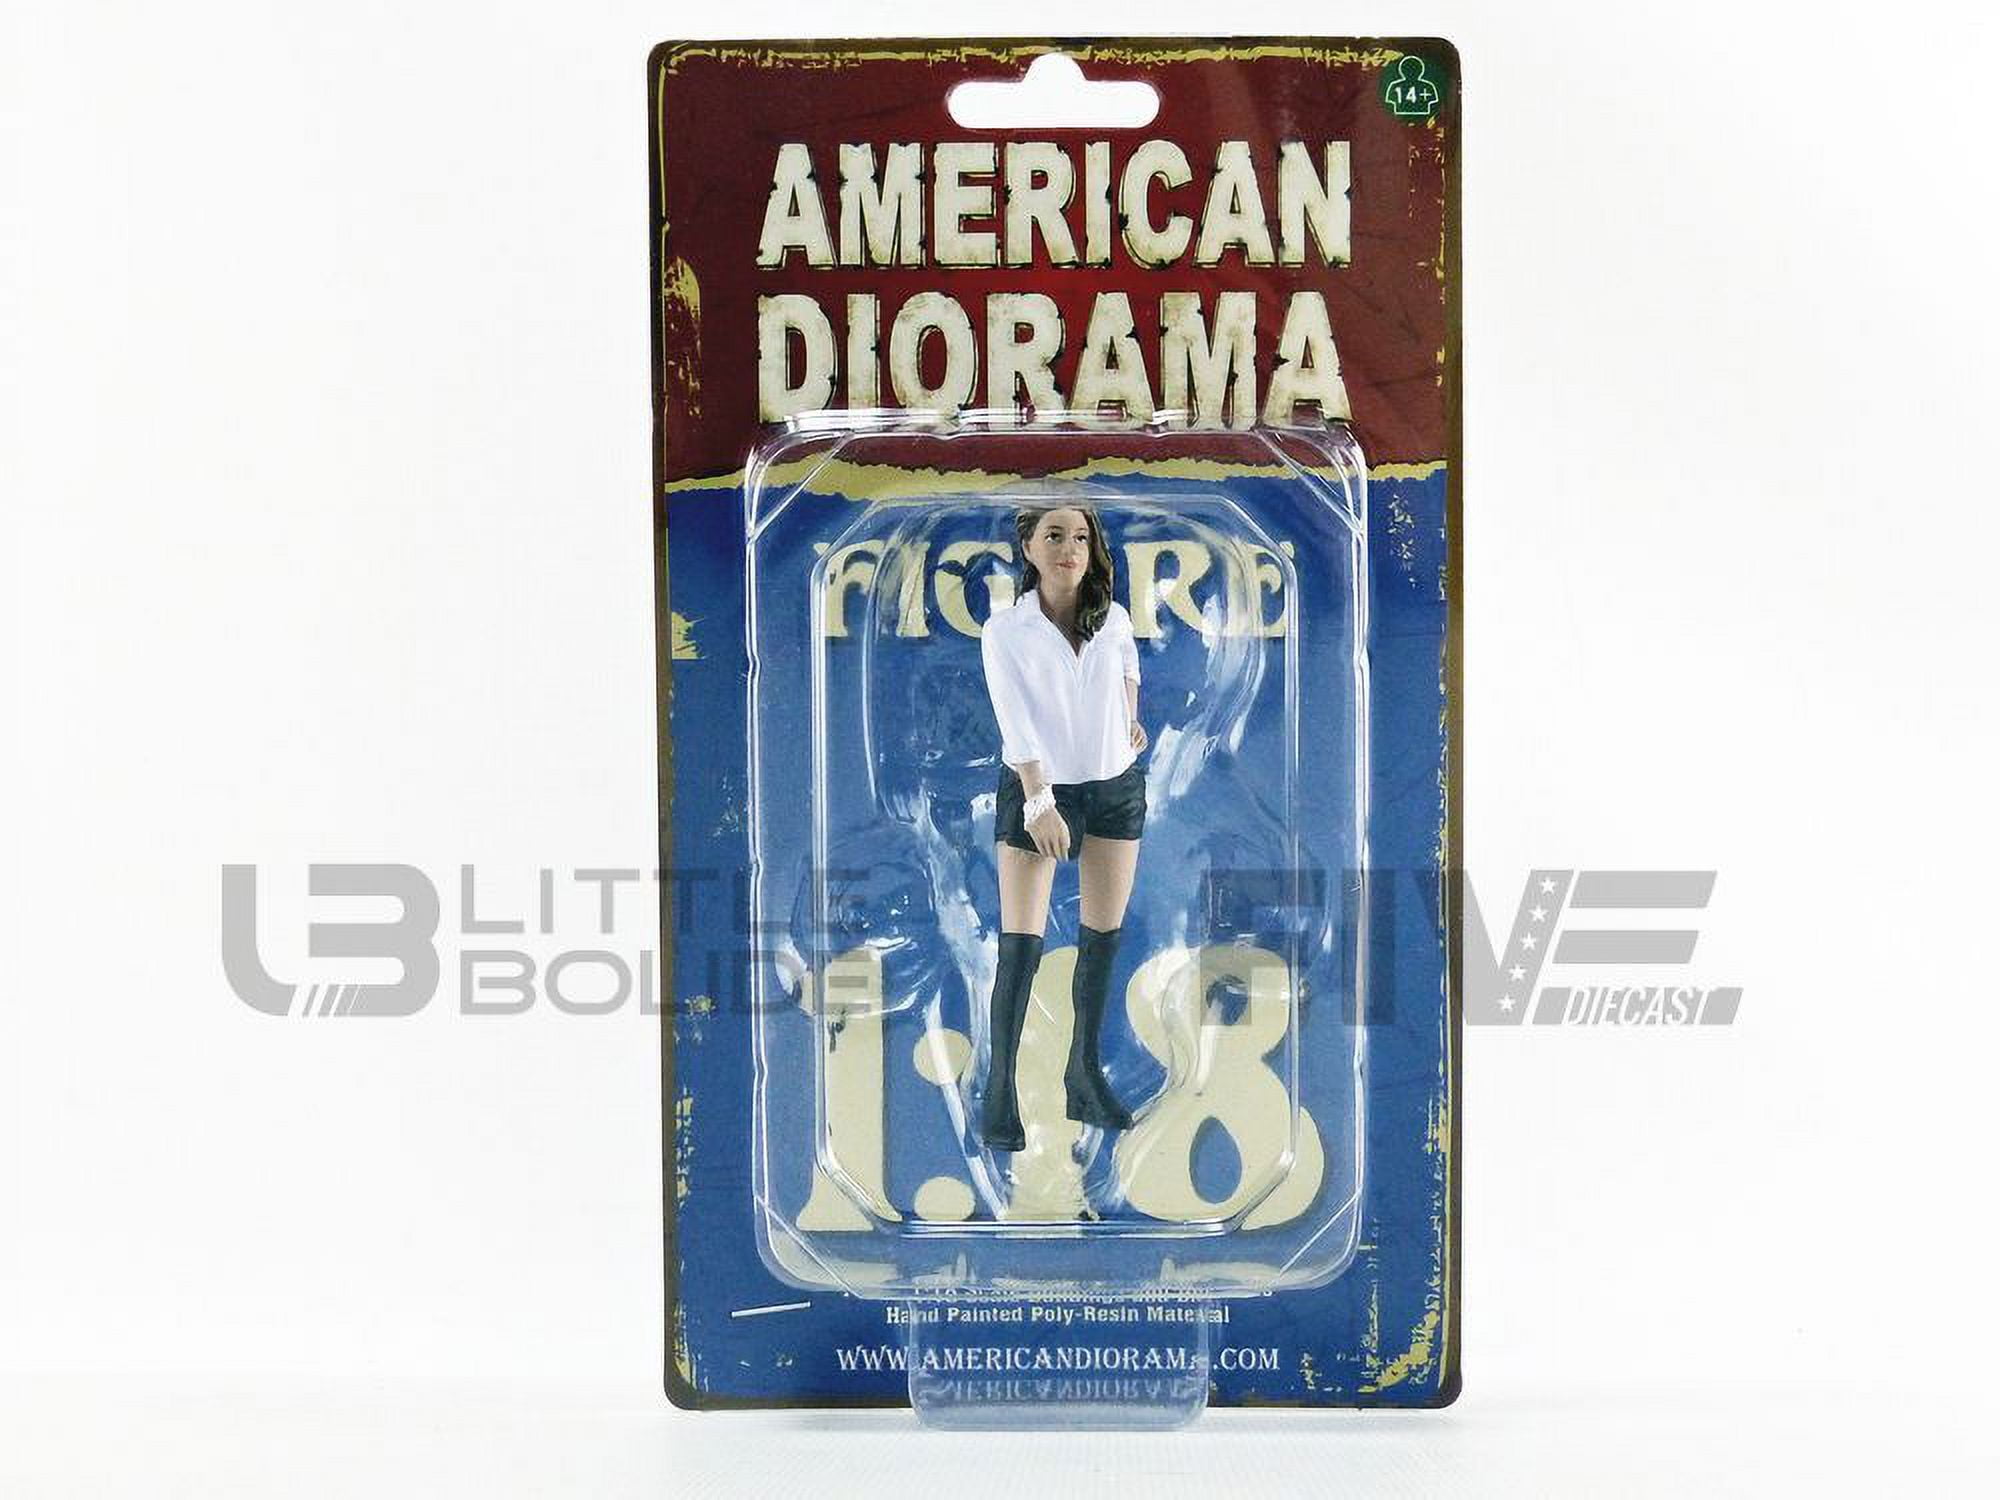 Picture of American Diorama 38227 Partygoers Figurine VII for 1 by 18 Scale Models